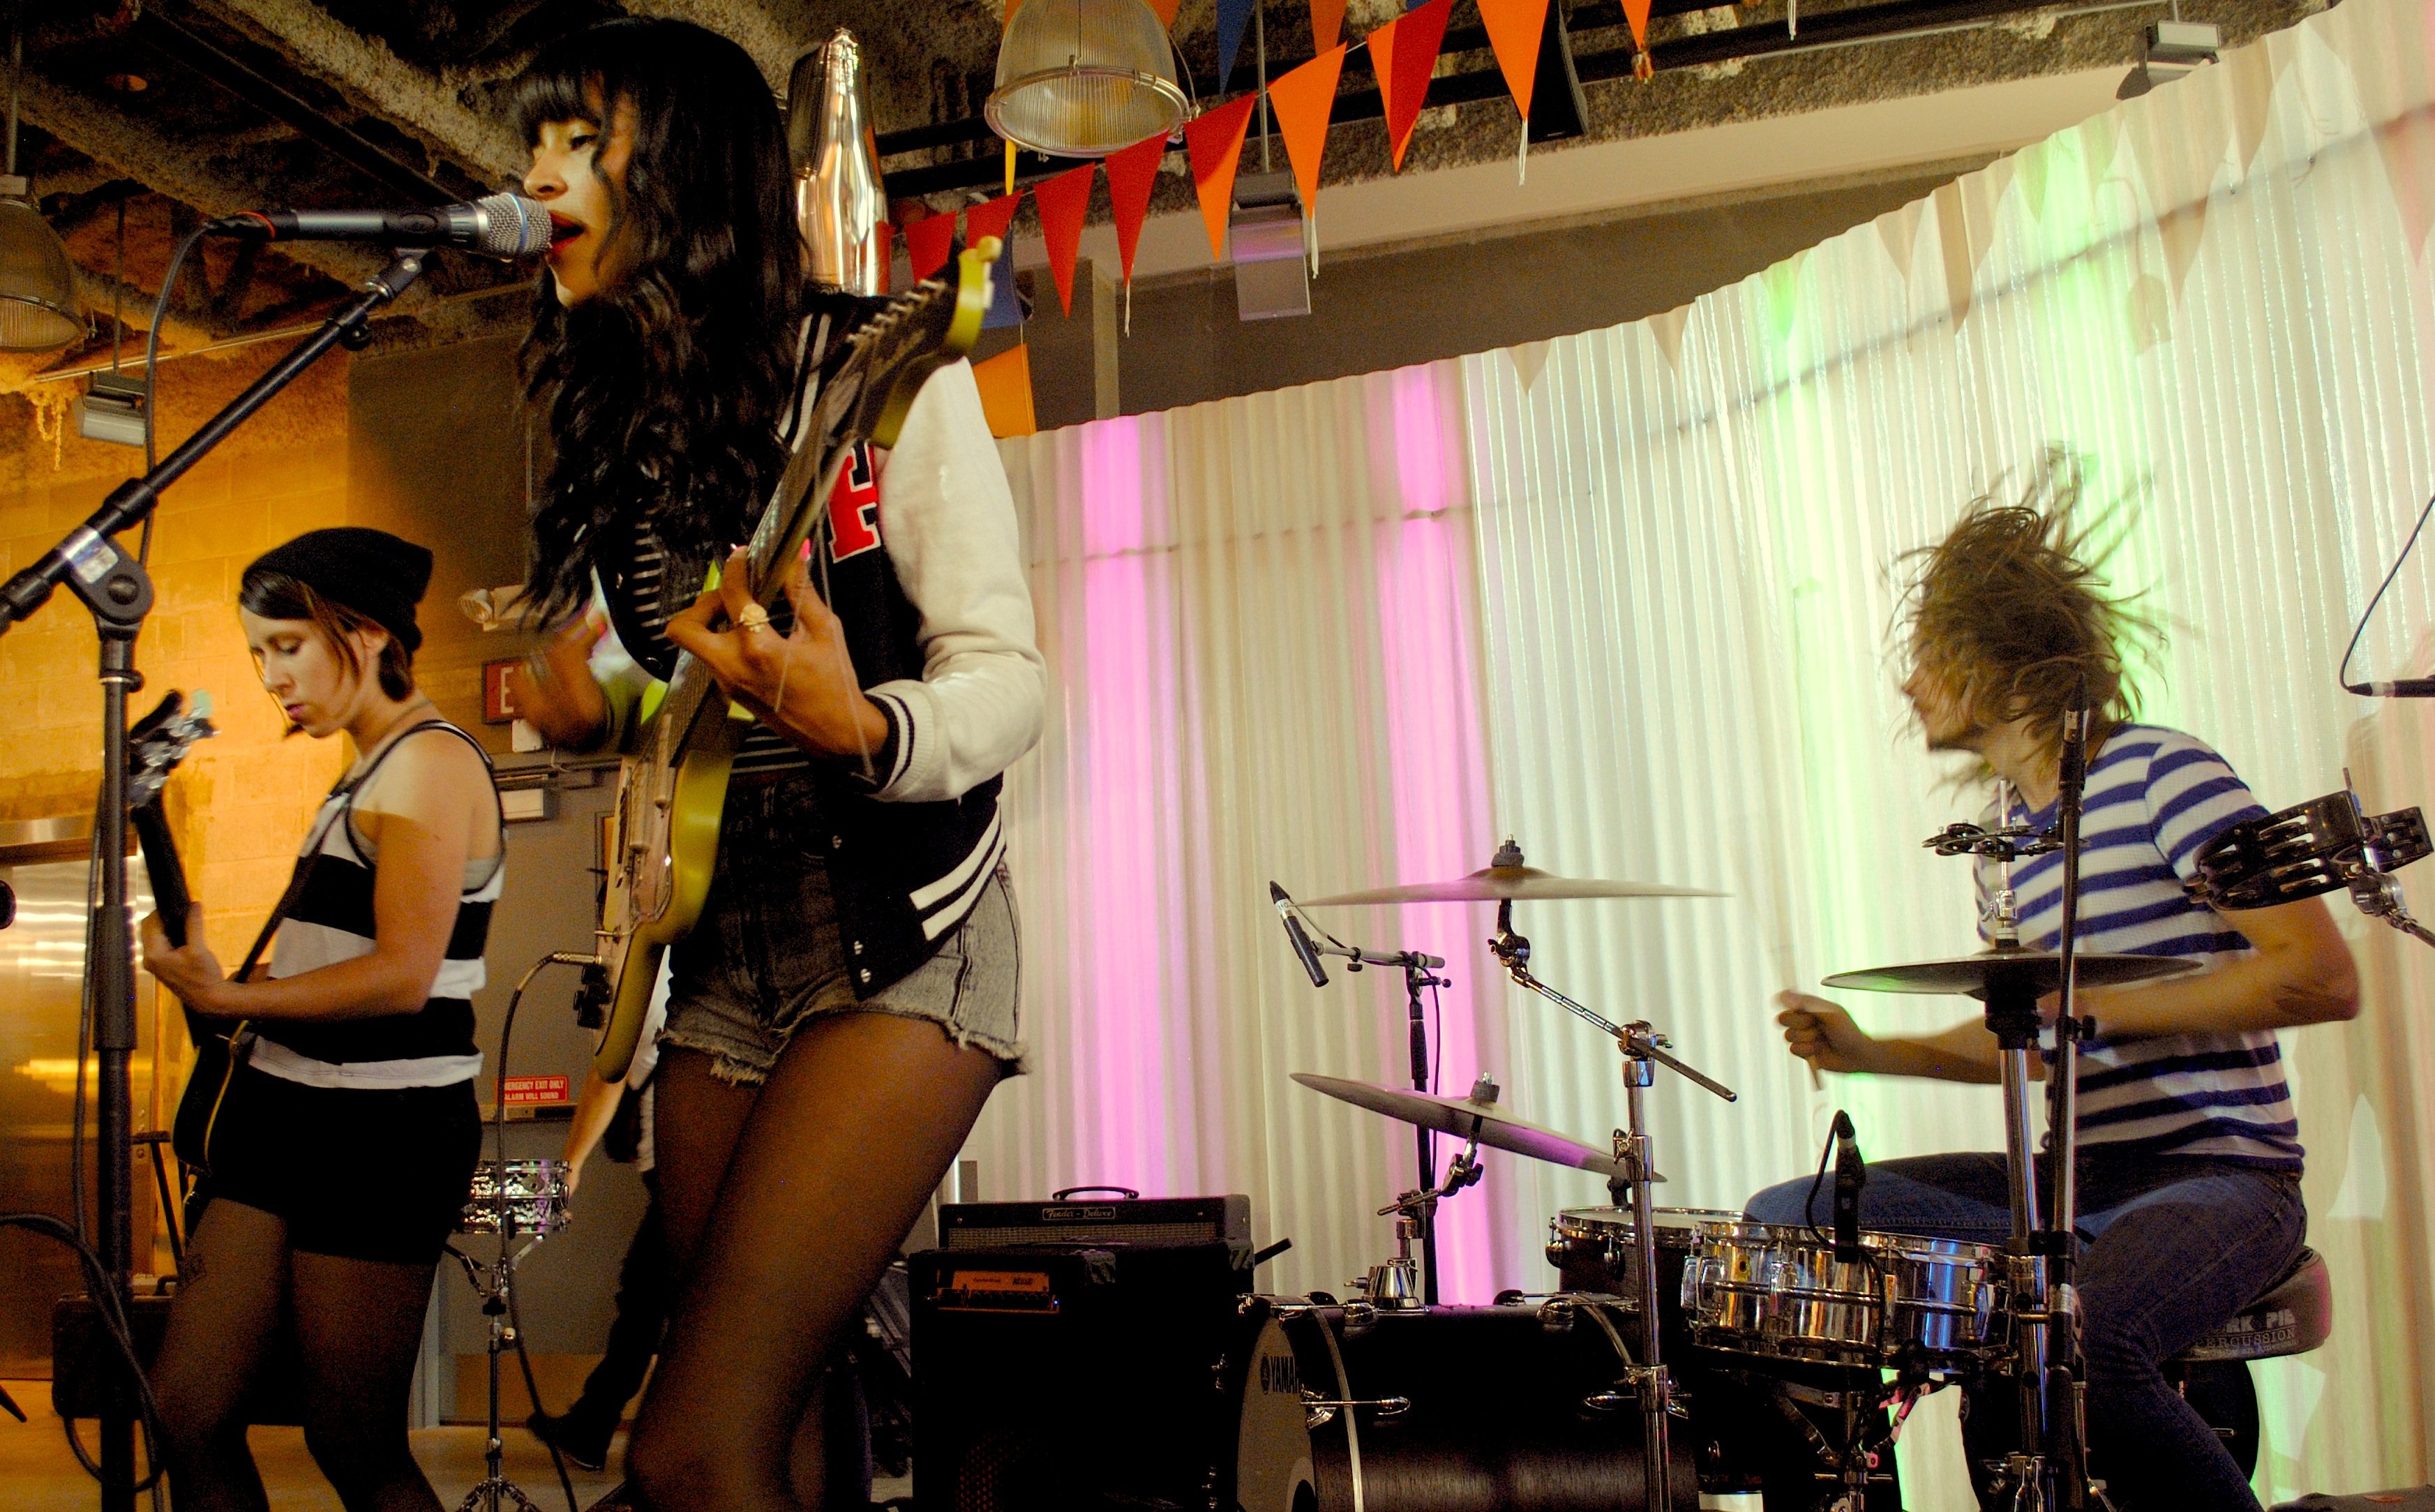 ... Day played a free NXNE showcase put on by Urban Outfittersâ€™s Queen